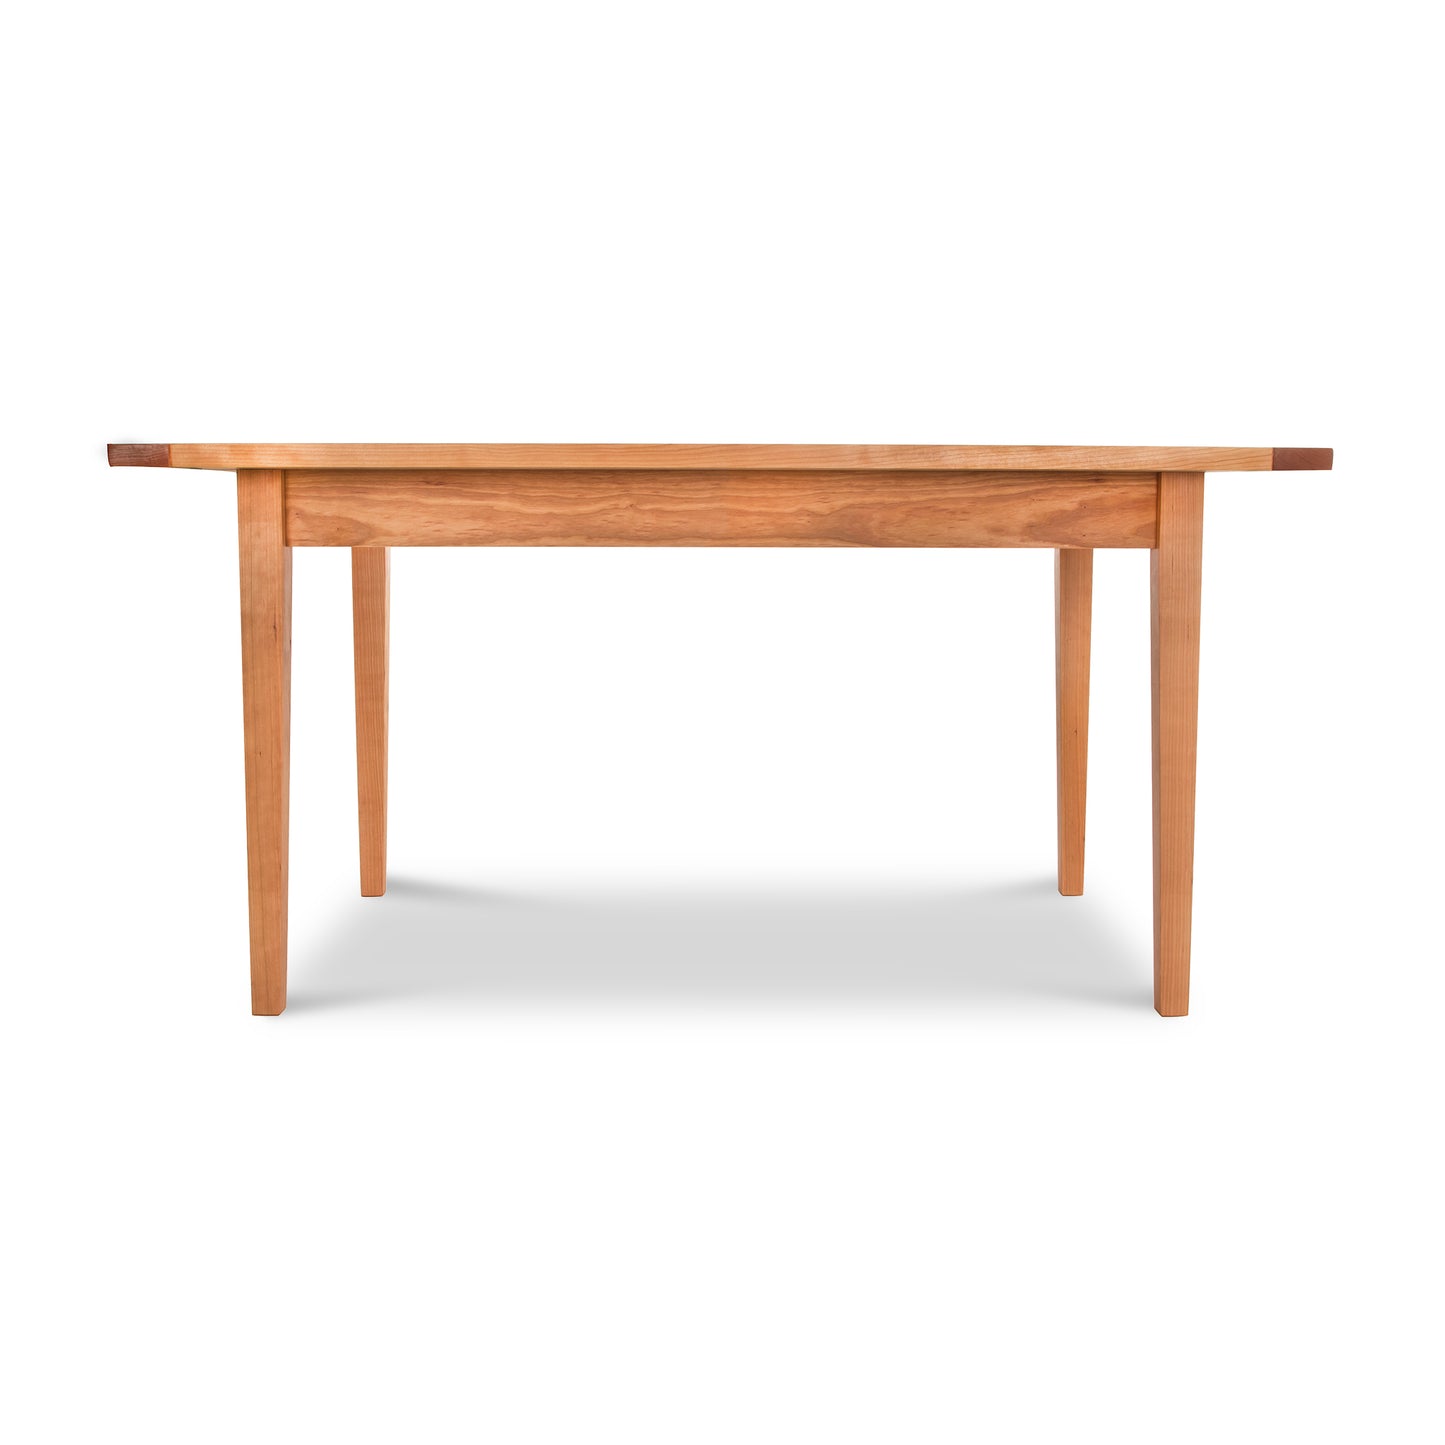 A Maple Corner Woodworks Vermont Shaker Harvest Extension Dining Table with a smooth top and four straight legs, isolated on a white background.